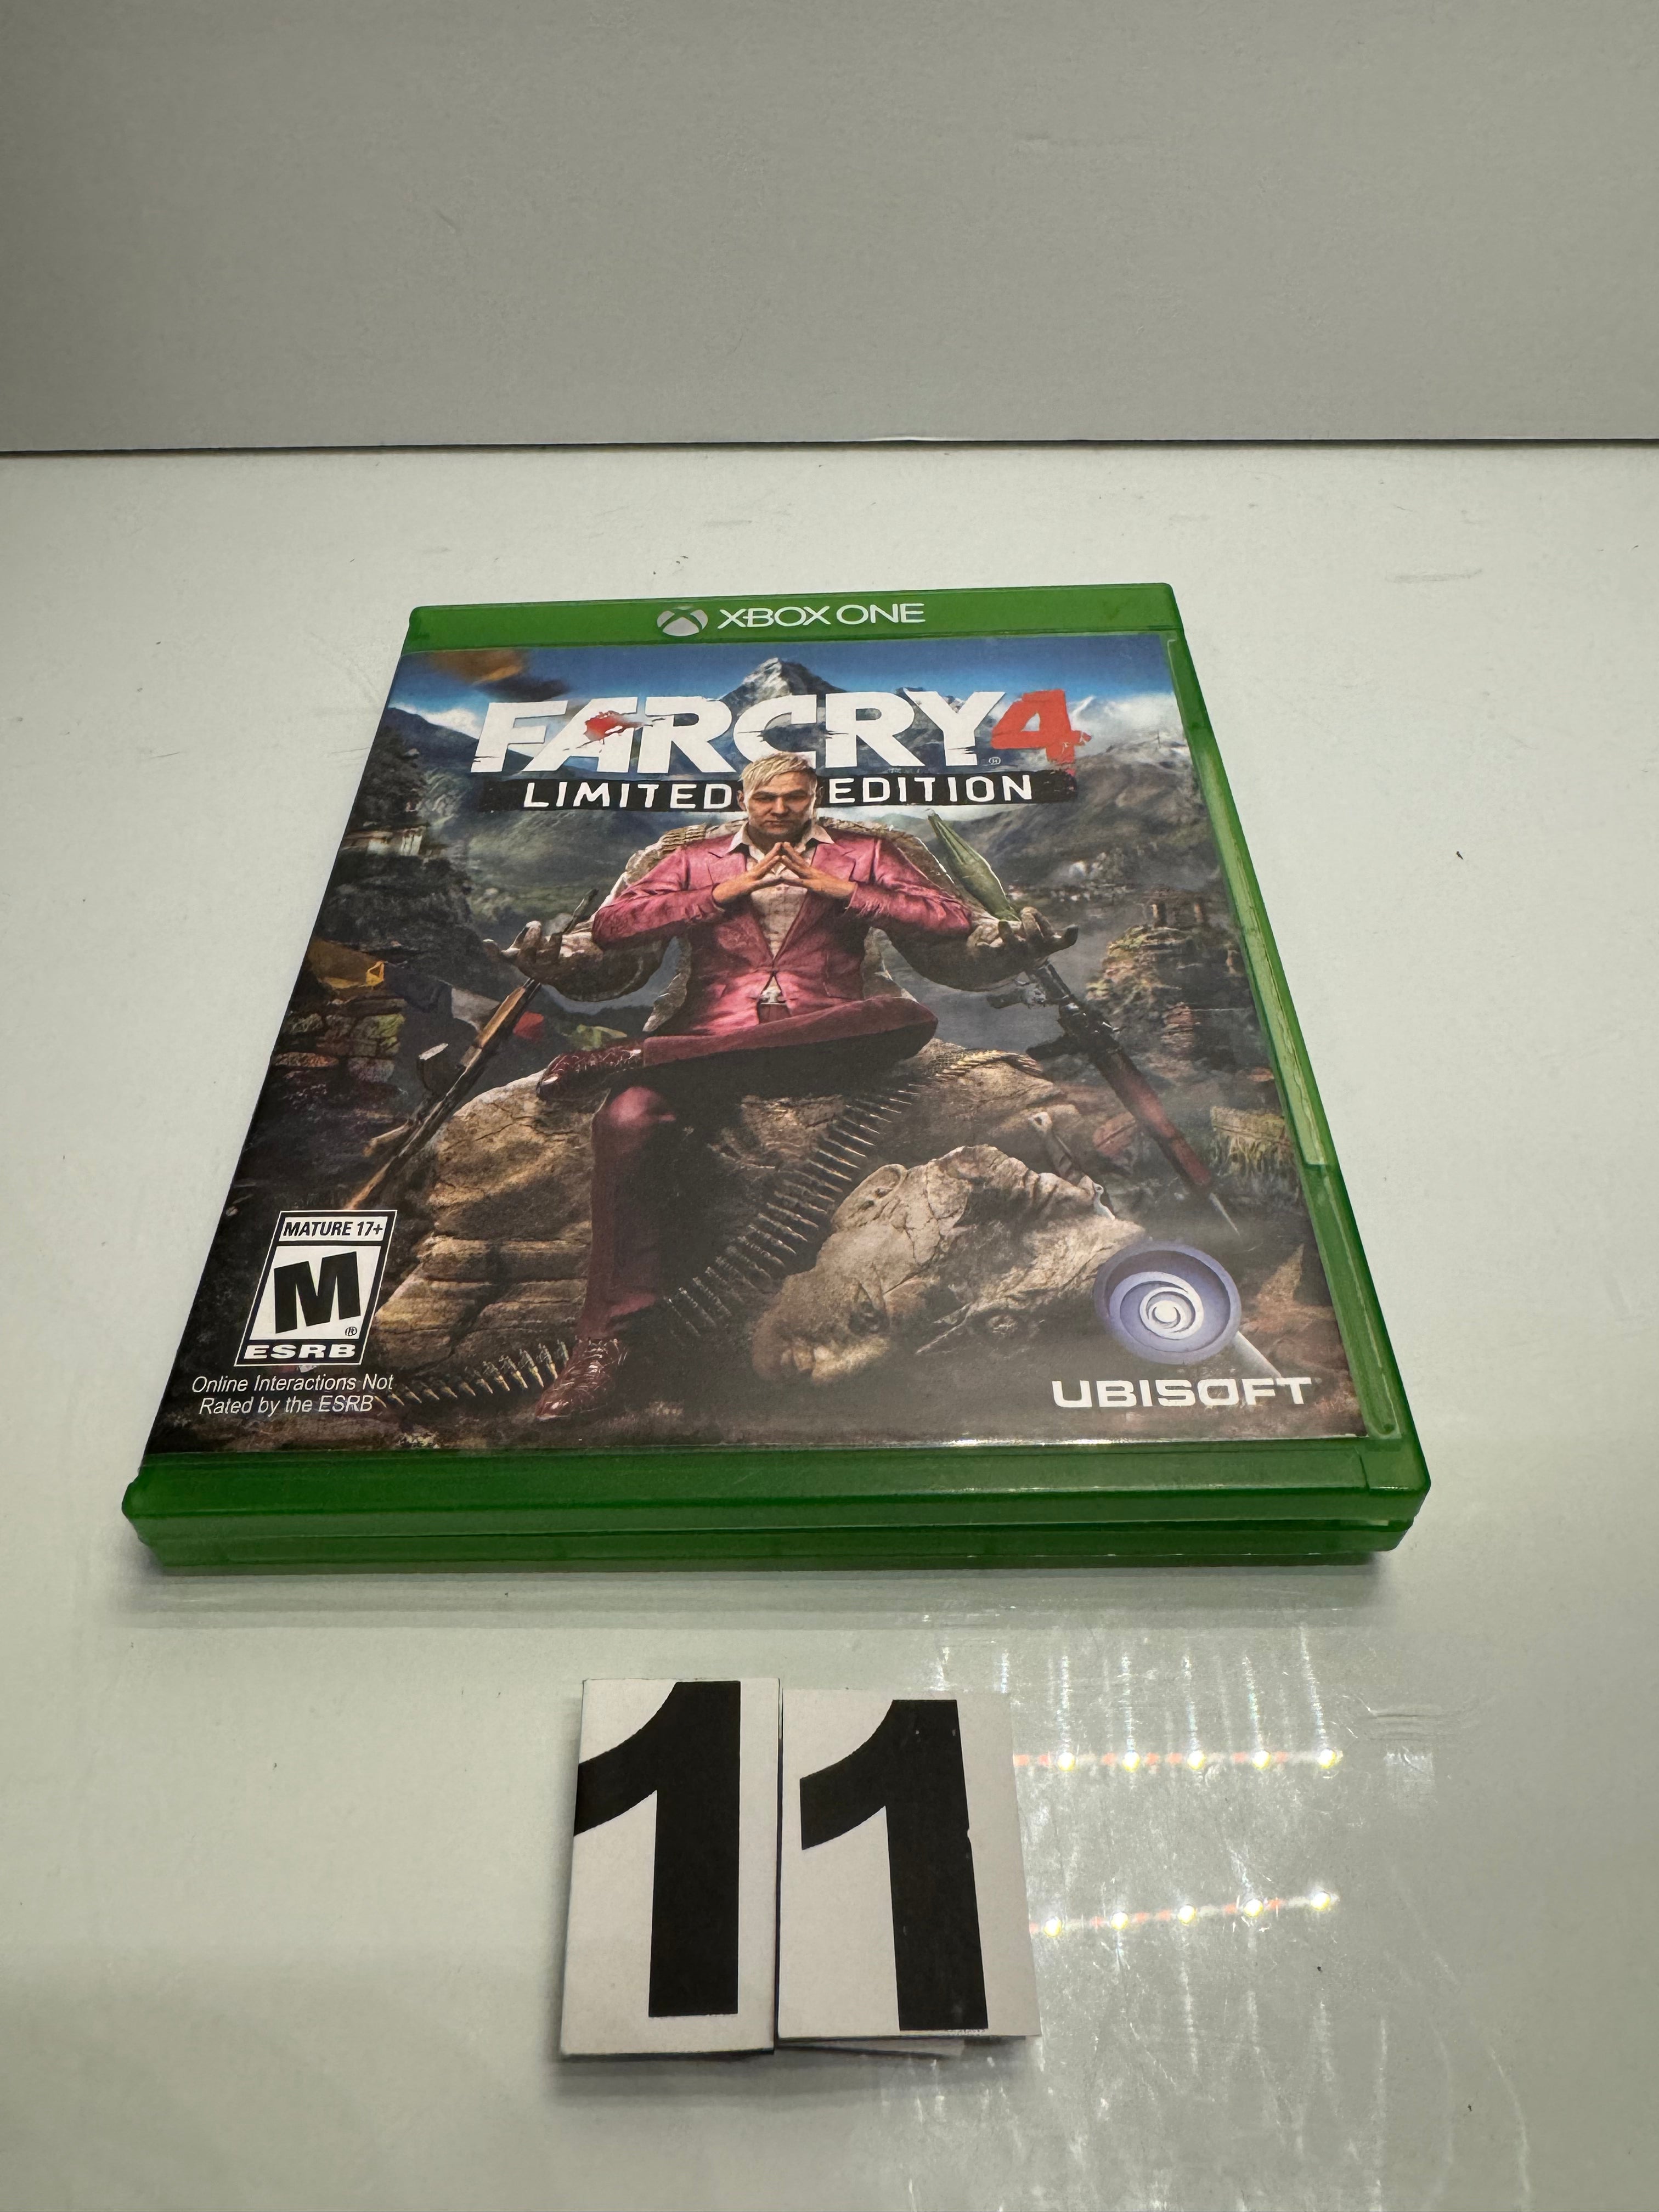 FarCry4 Xbox One Video Game